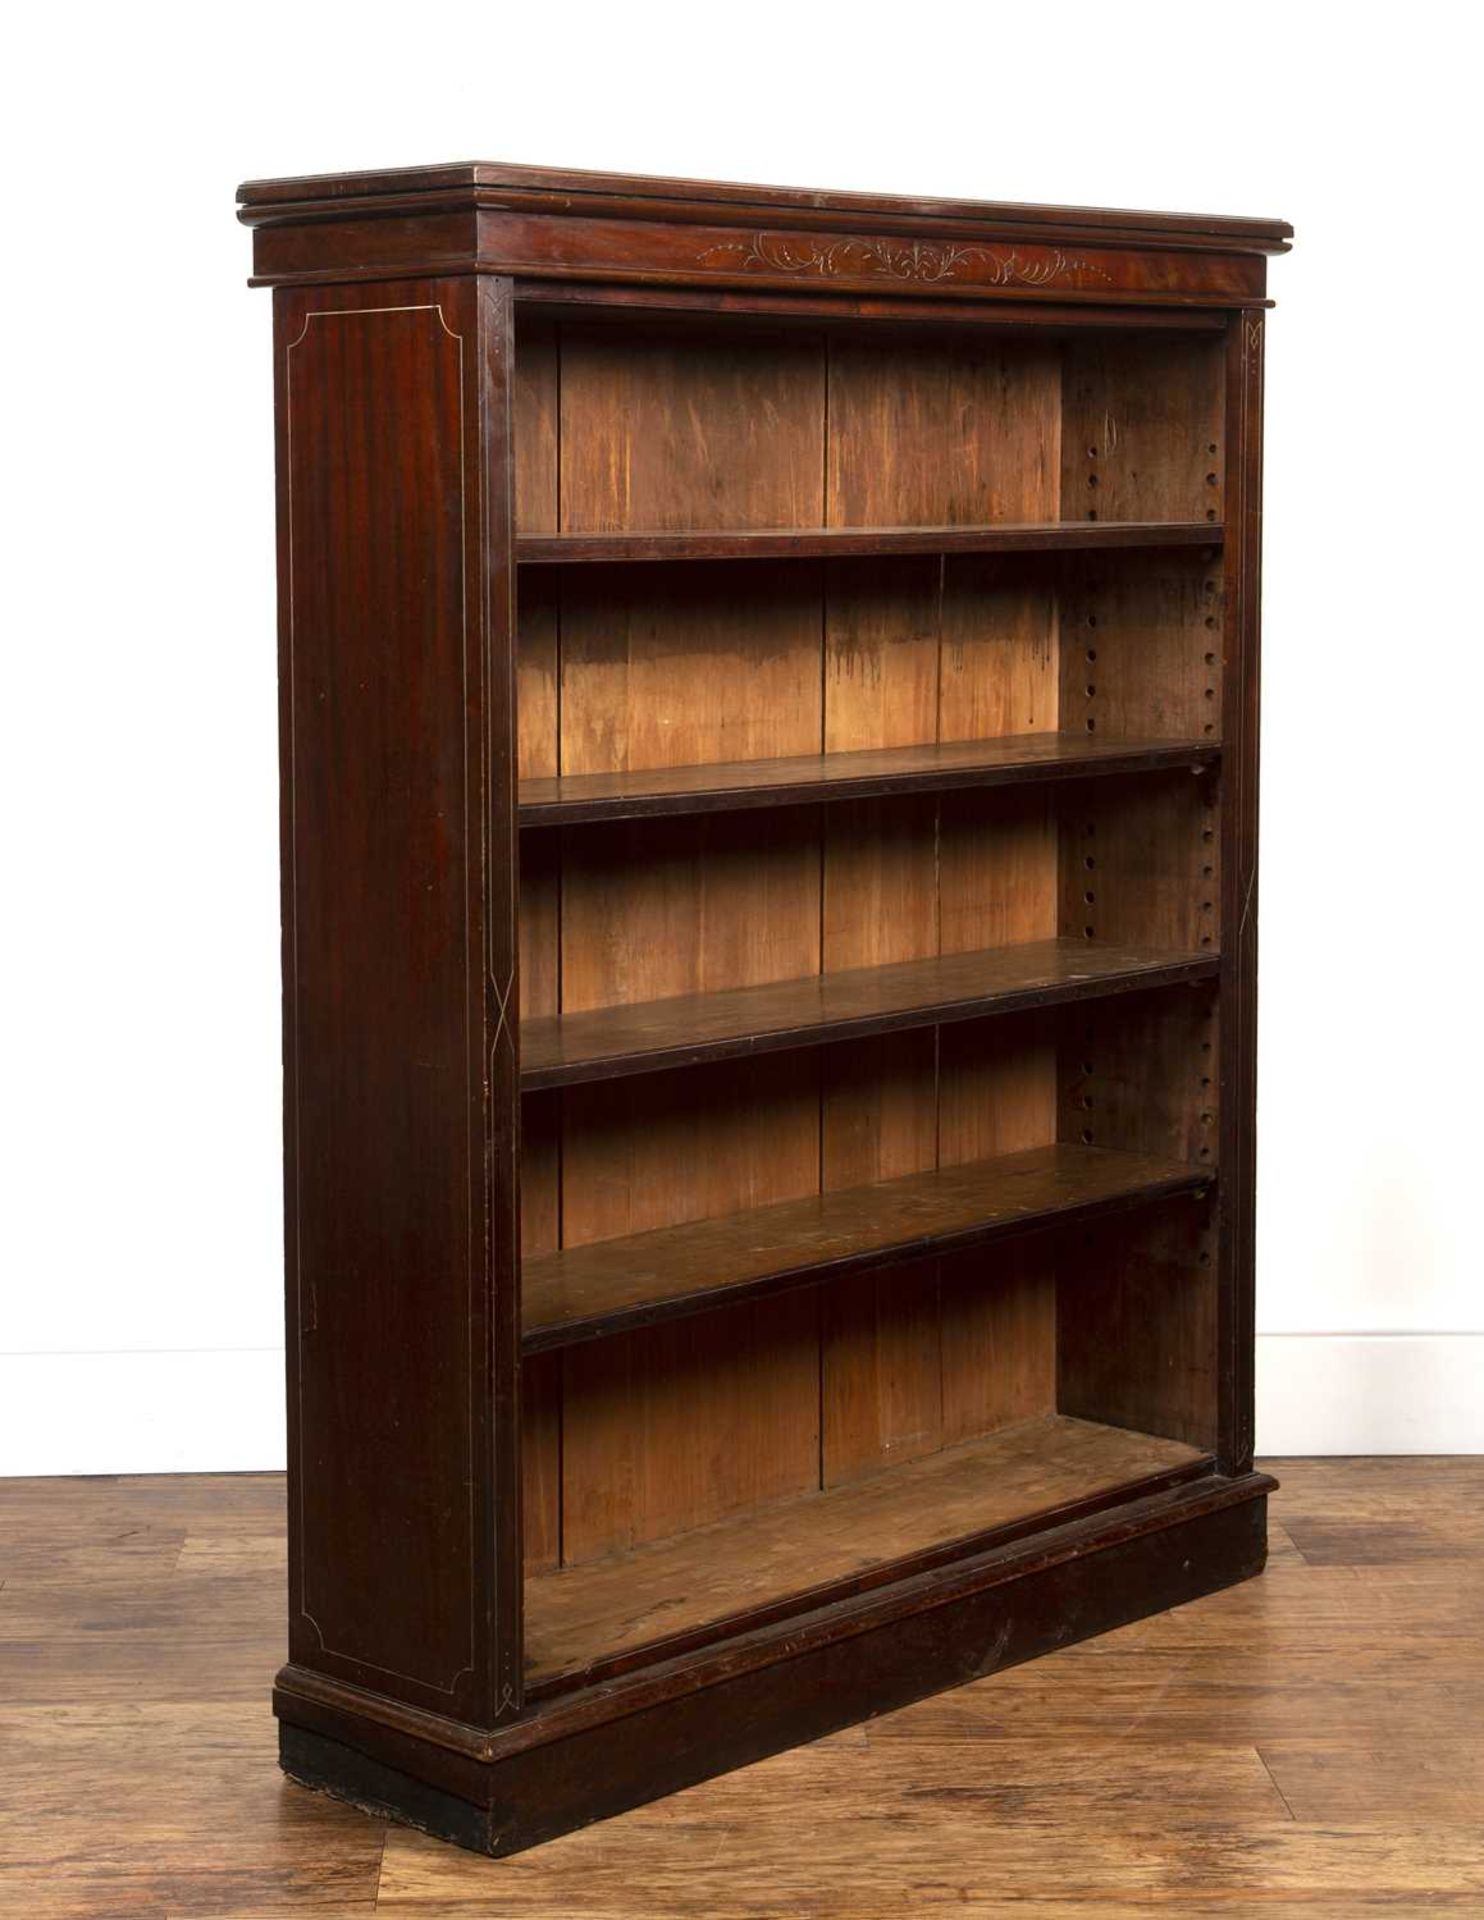 Mahogany open front large bookcase with four height-adjustable shelves, the outer frame with - Image 2 of 4